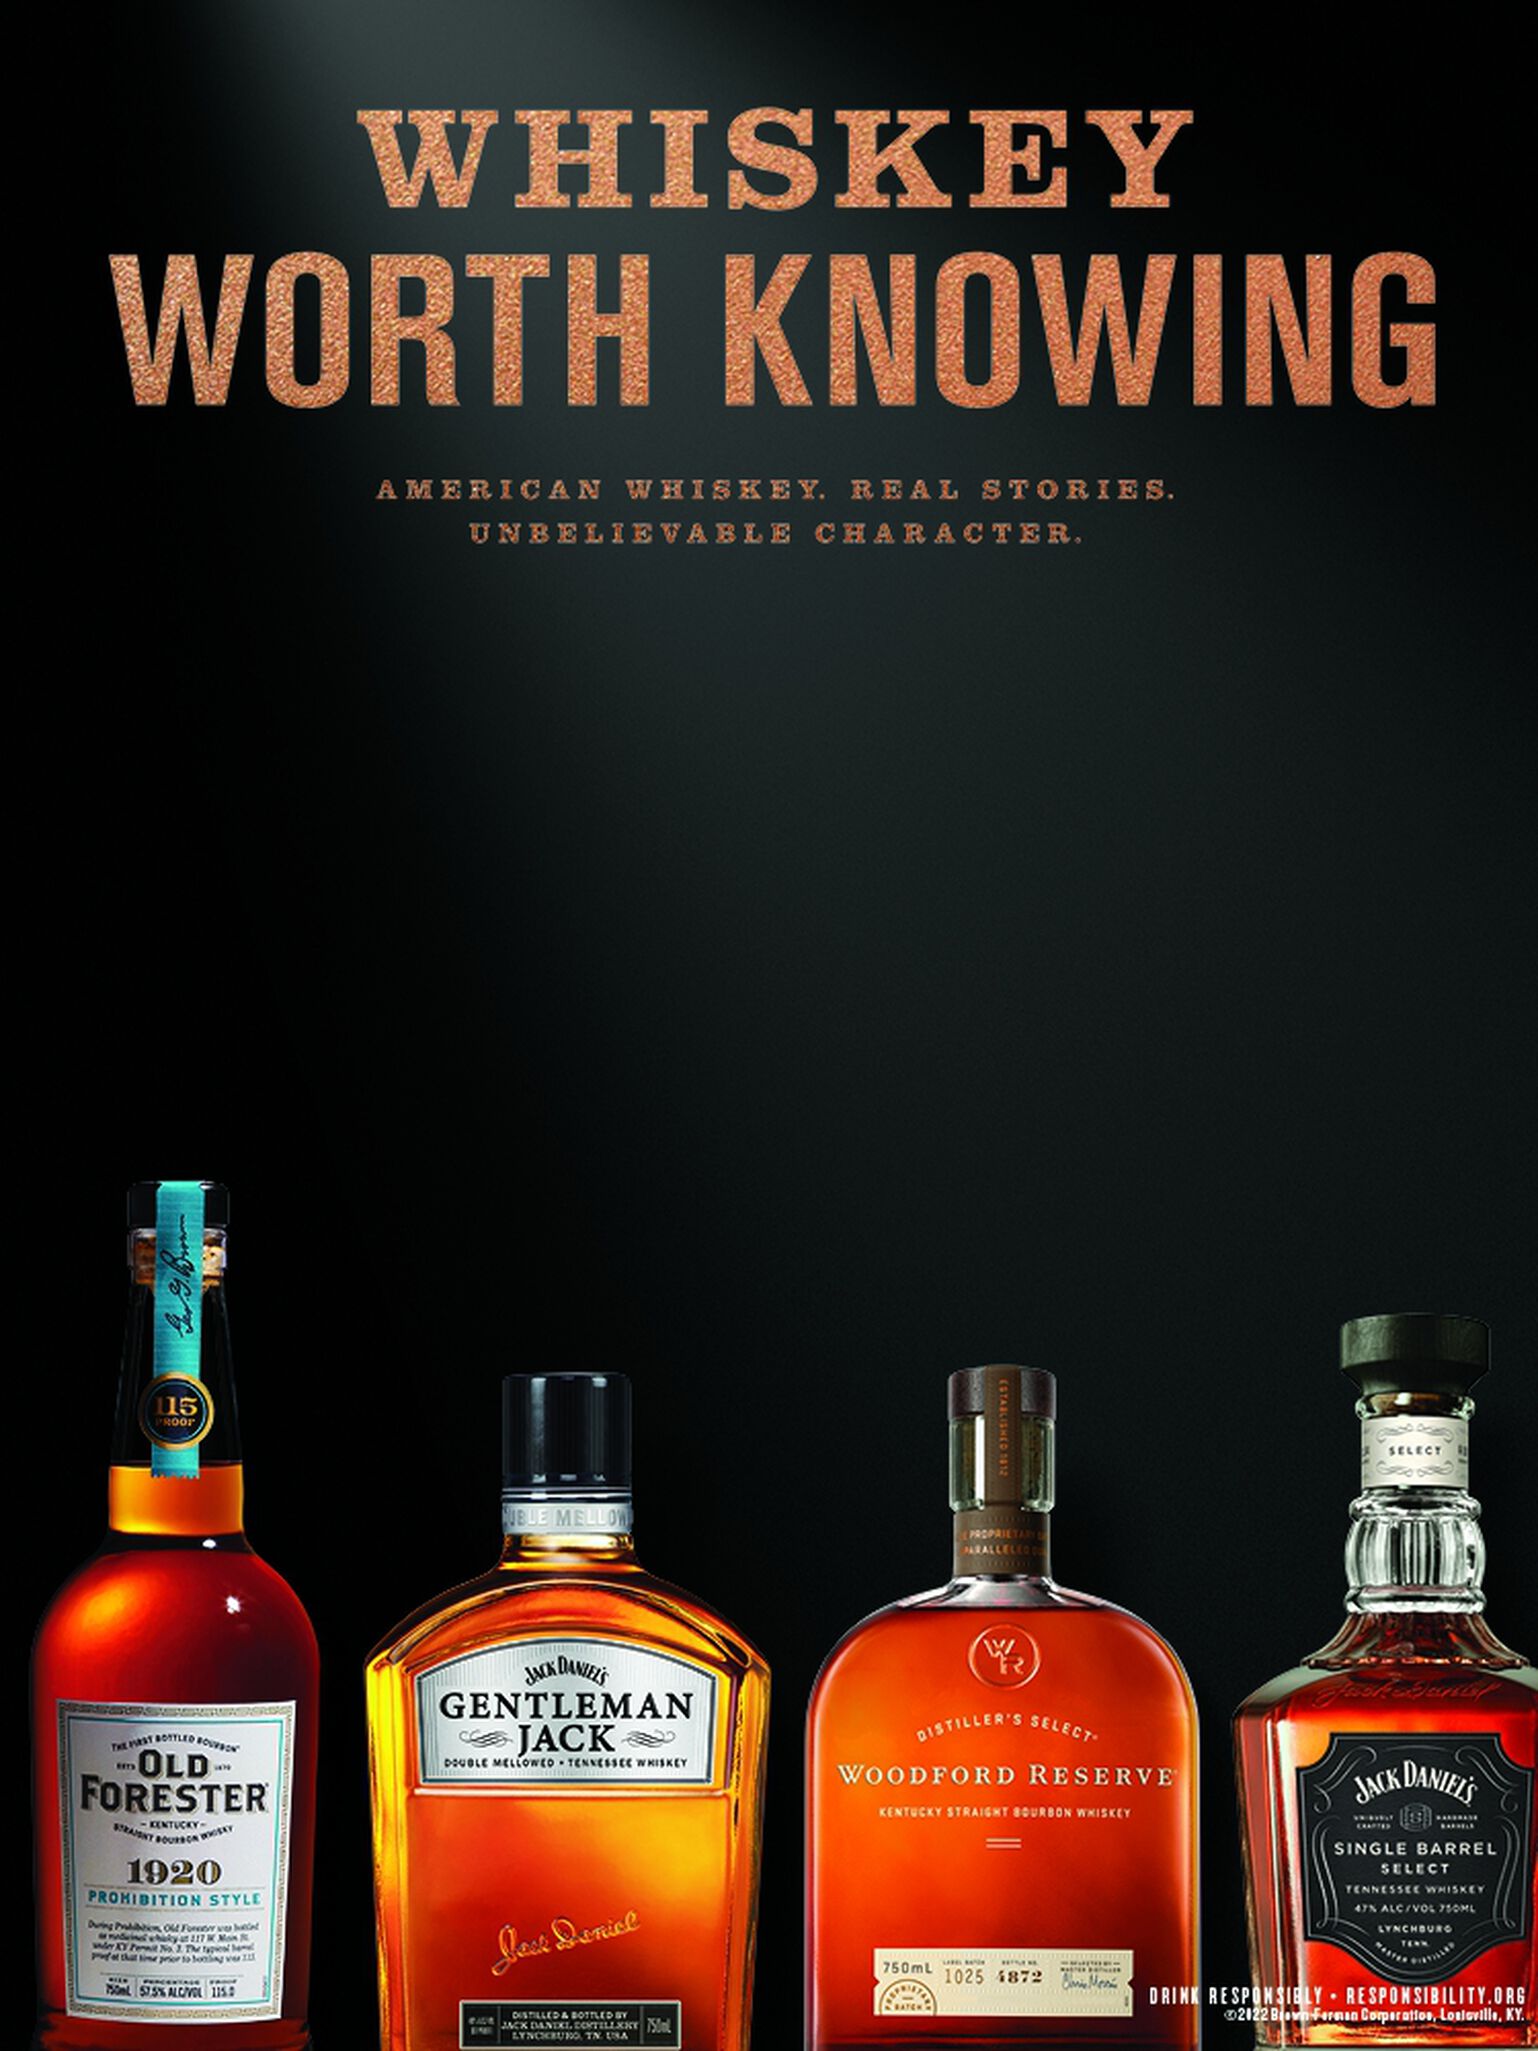 Whiskeys from the "Whiskey Worth Knowing" Collection